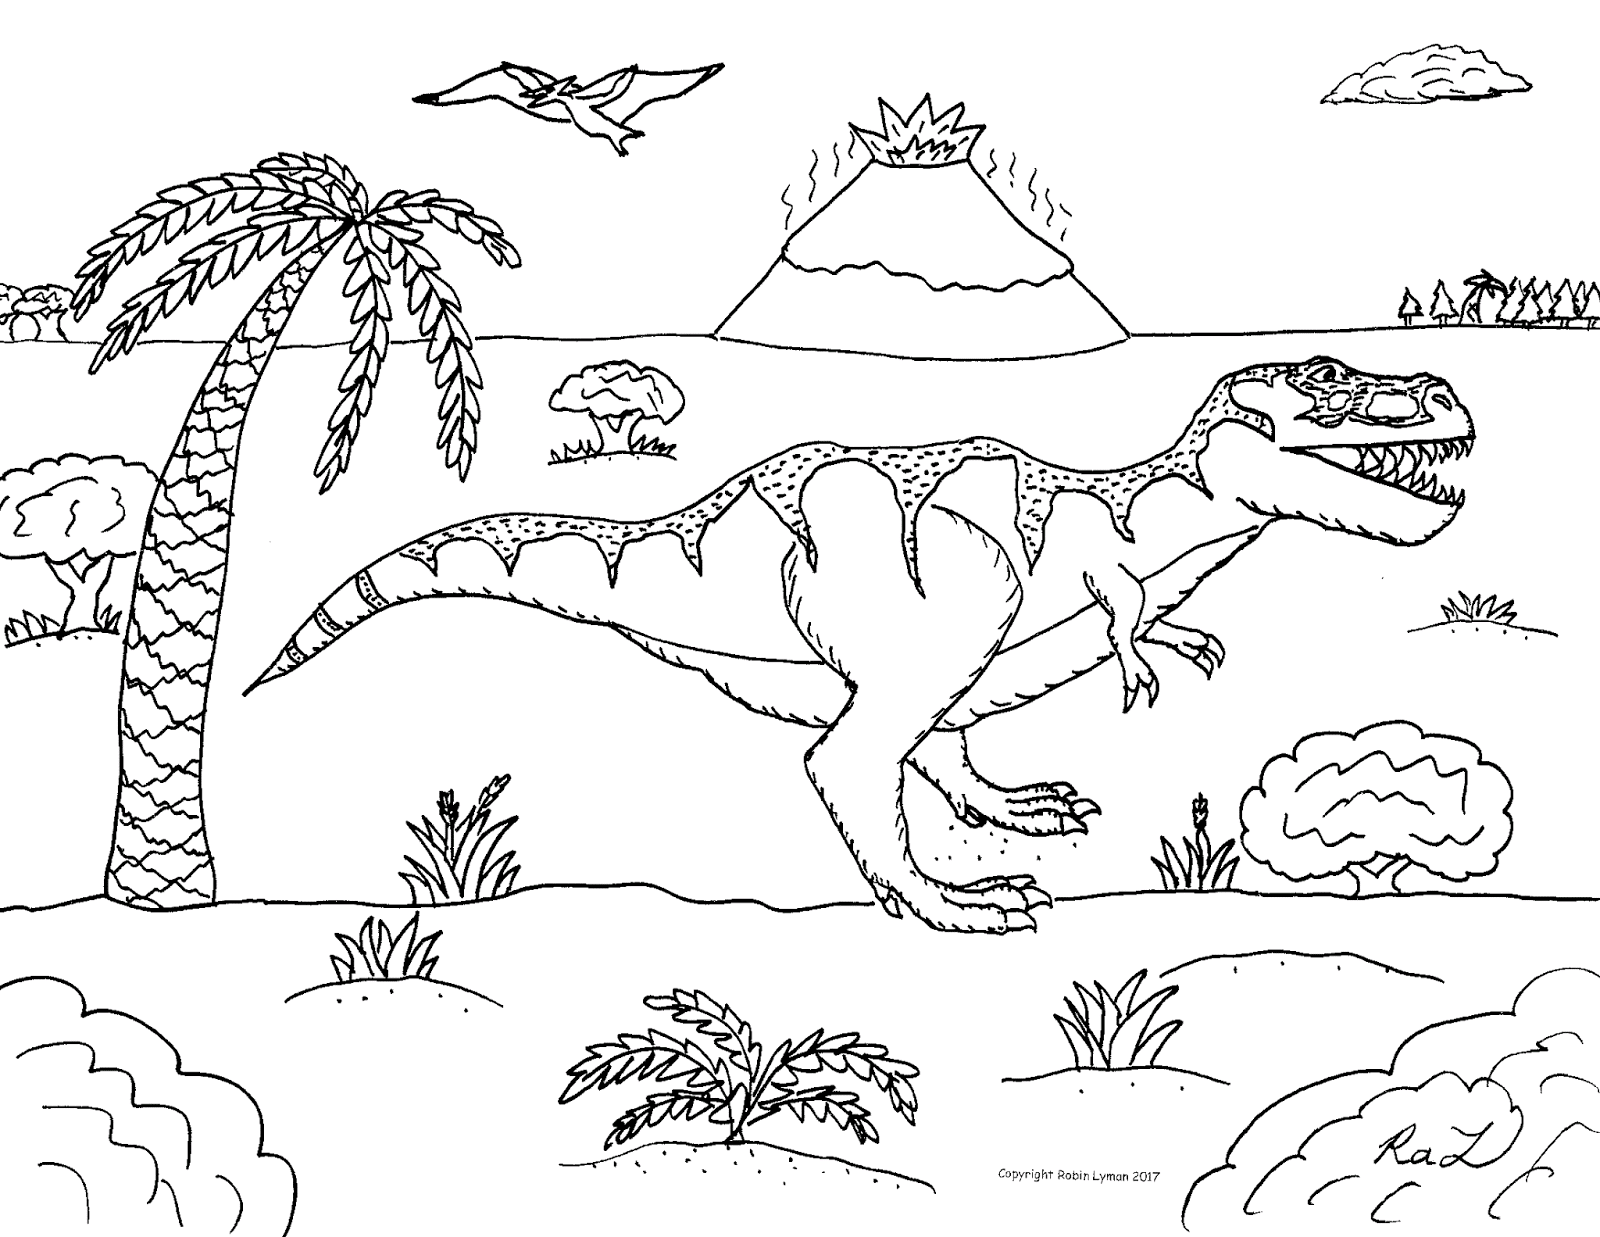 Robin's Great Coloring Pages: Tyrannosaurus and Triceratops